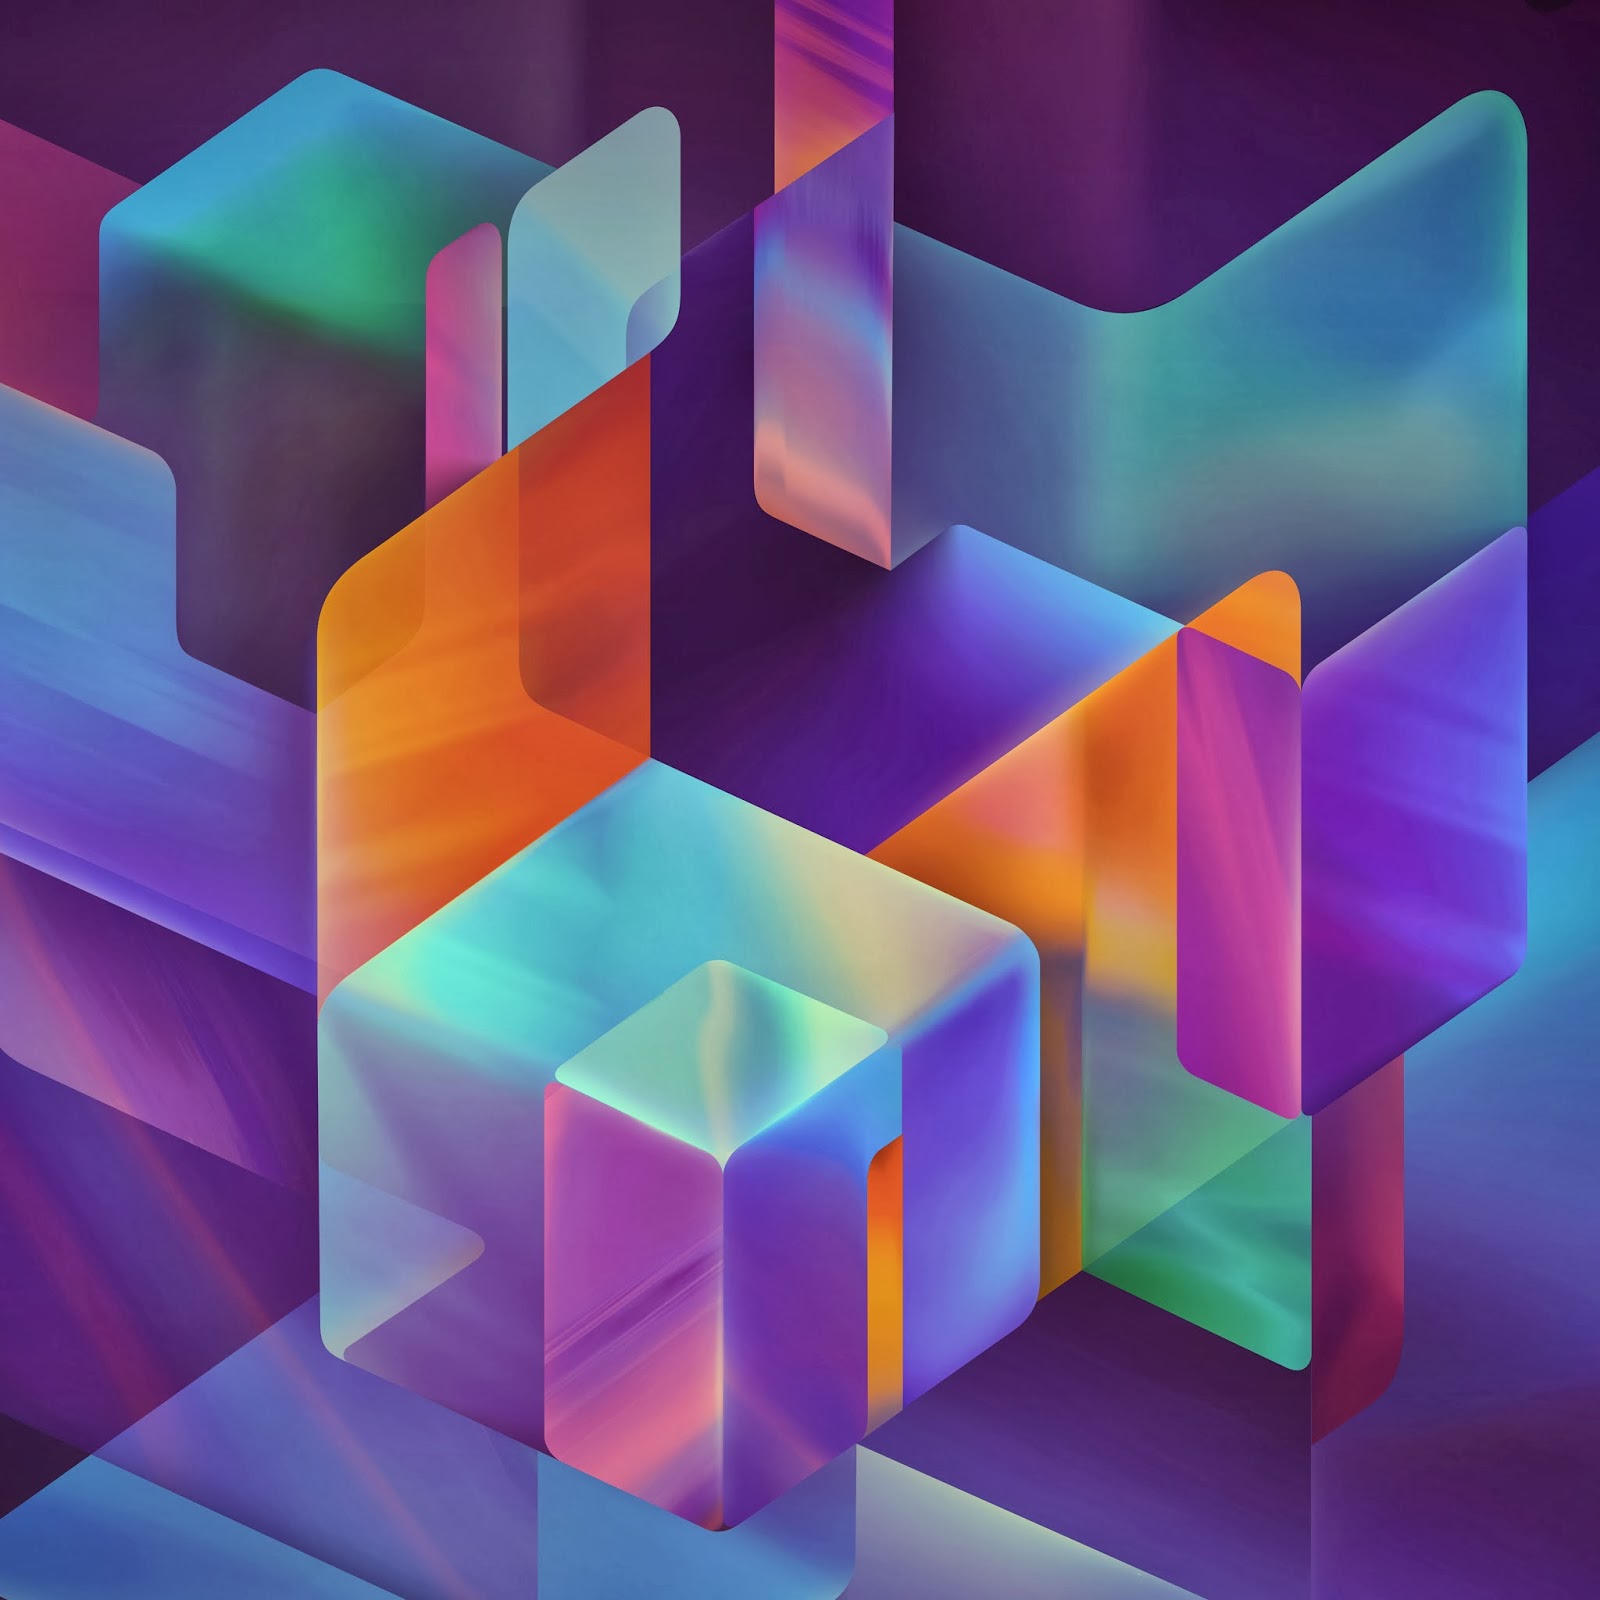 HotMOD: Exclusive - Nexus 5 wallpapers for your device